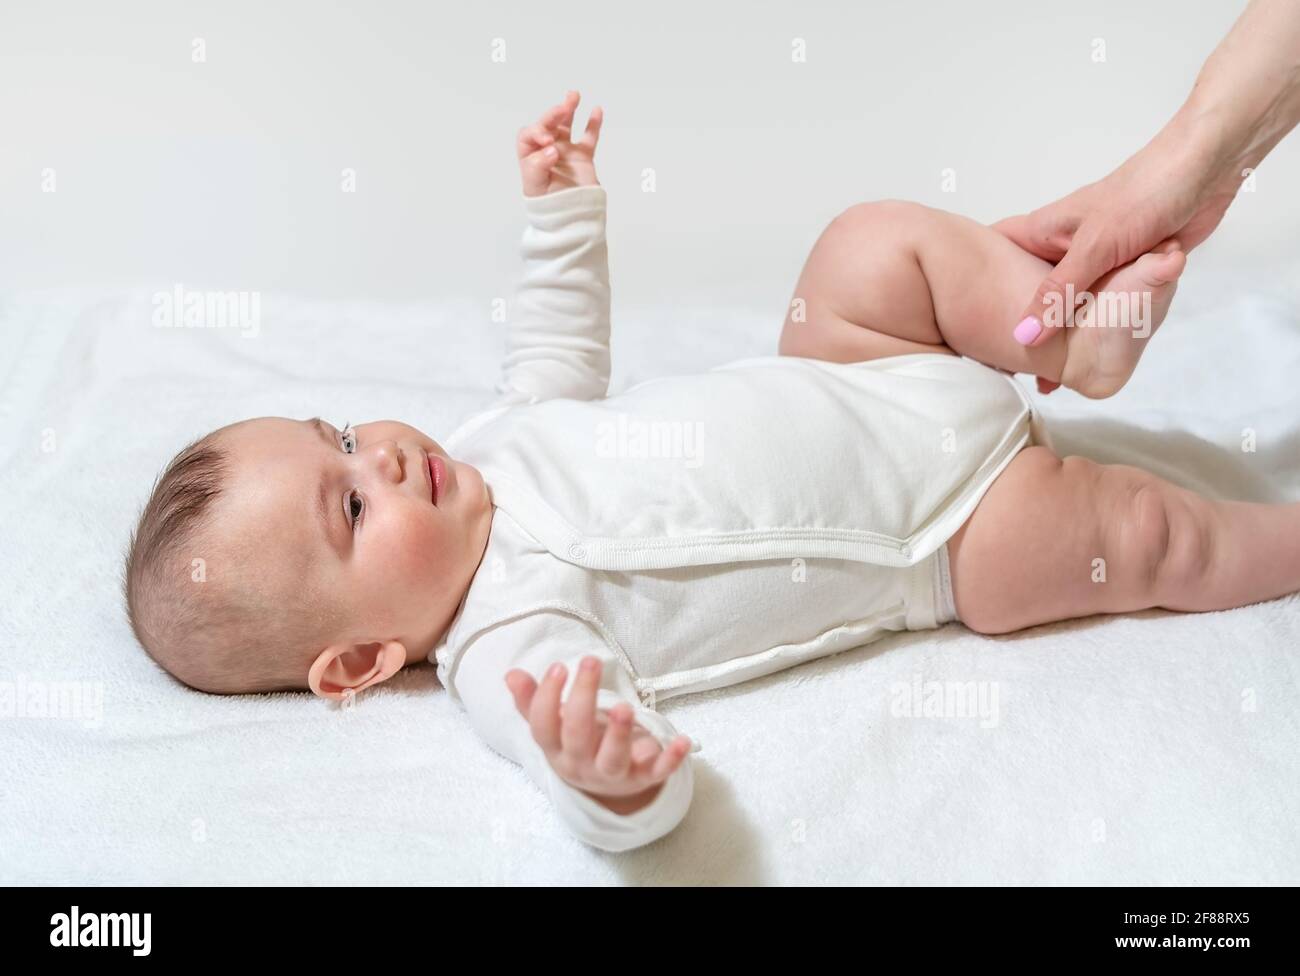 Newborn healthy baby doing physical exercises for the legs and hip joint. With the help of the medic's mom. On white background. Stock Photo